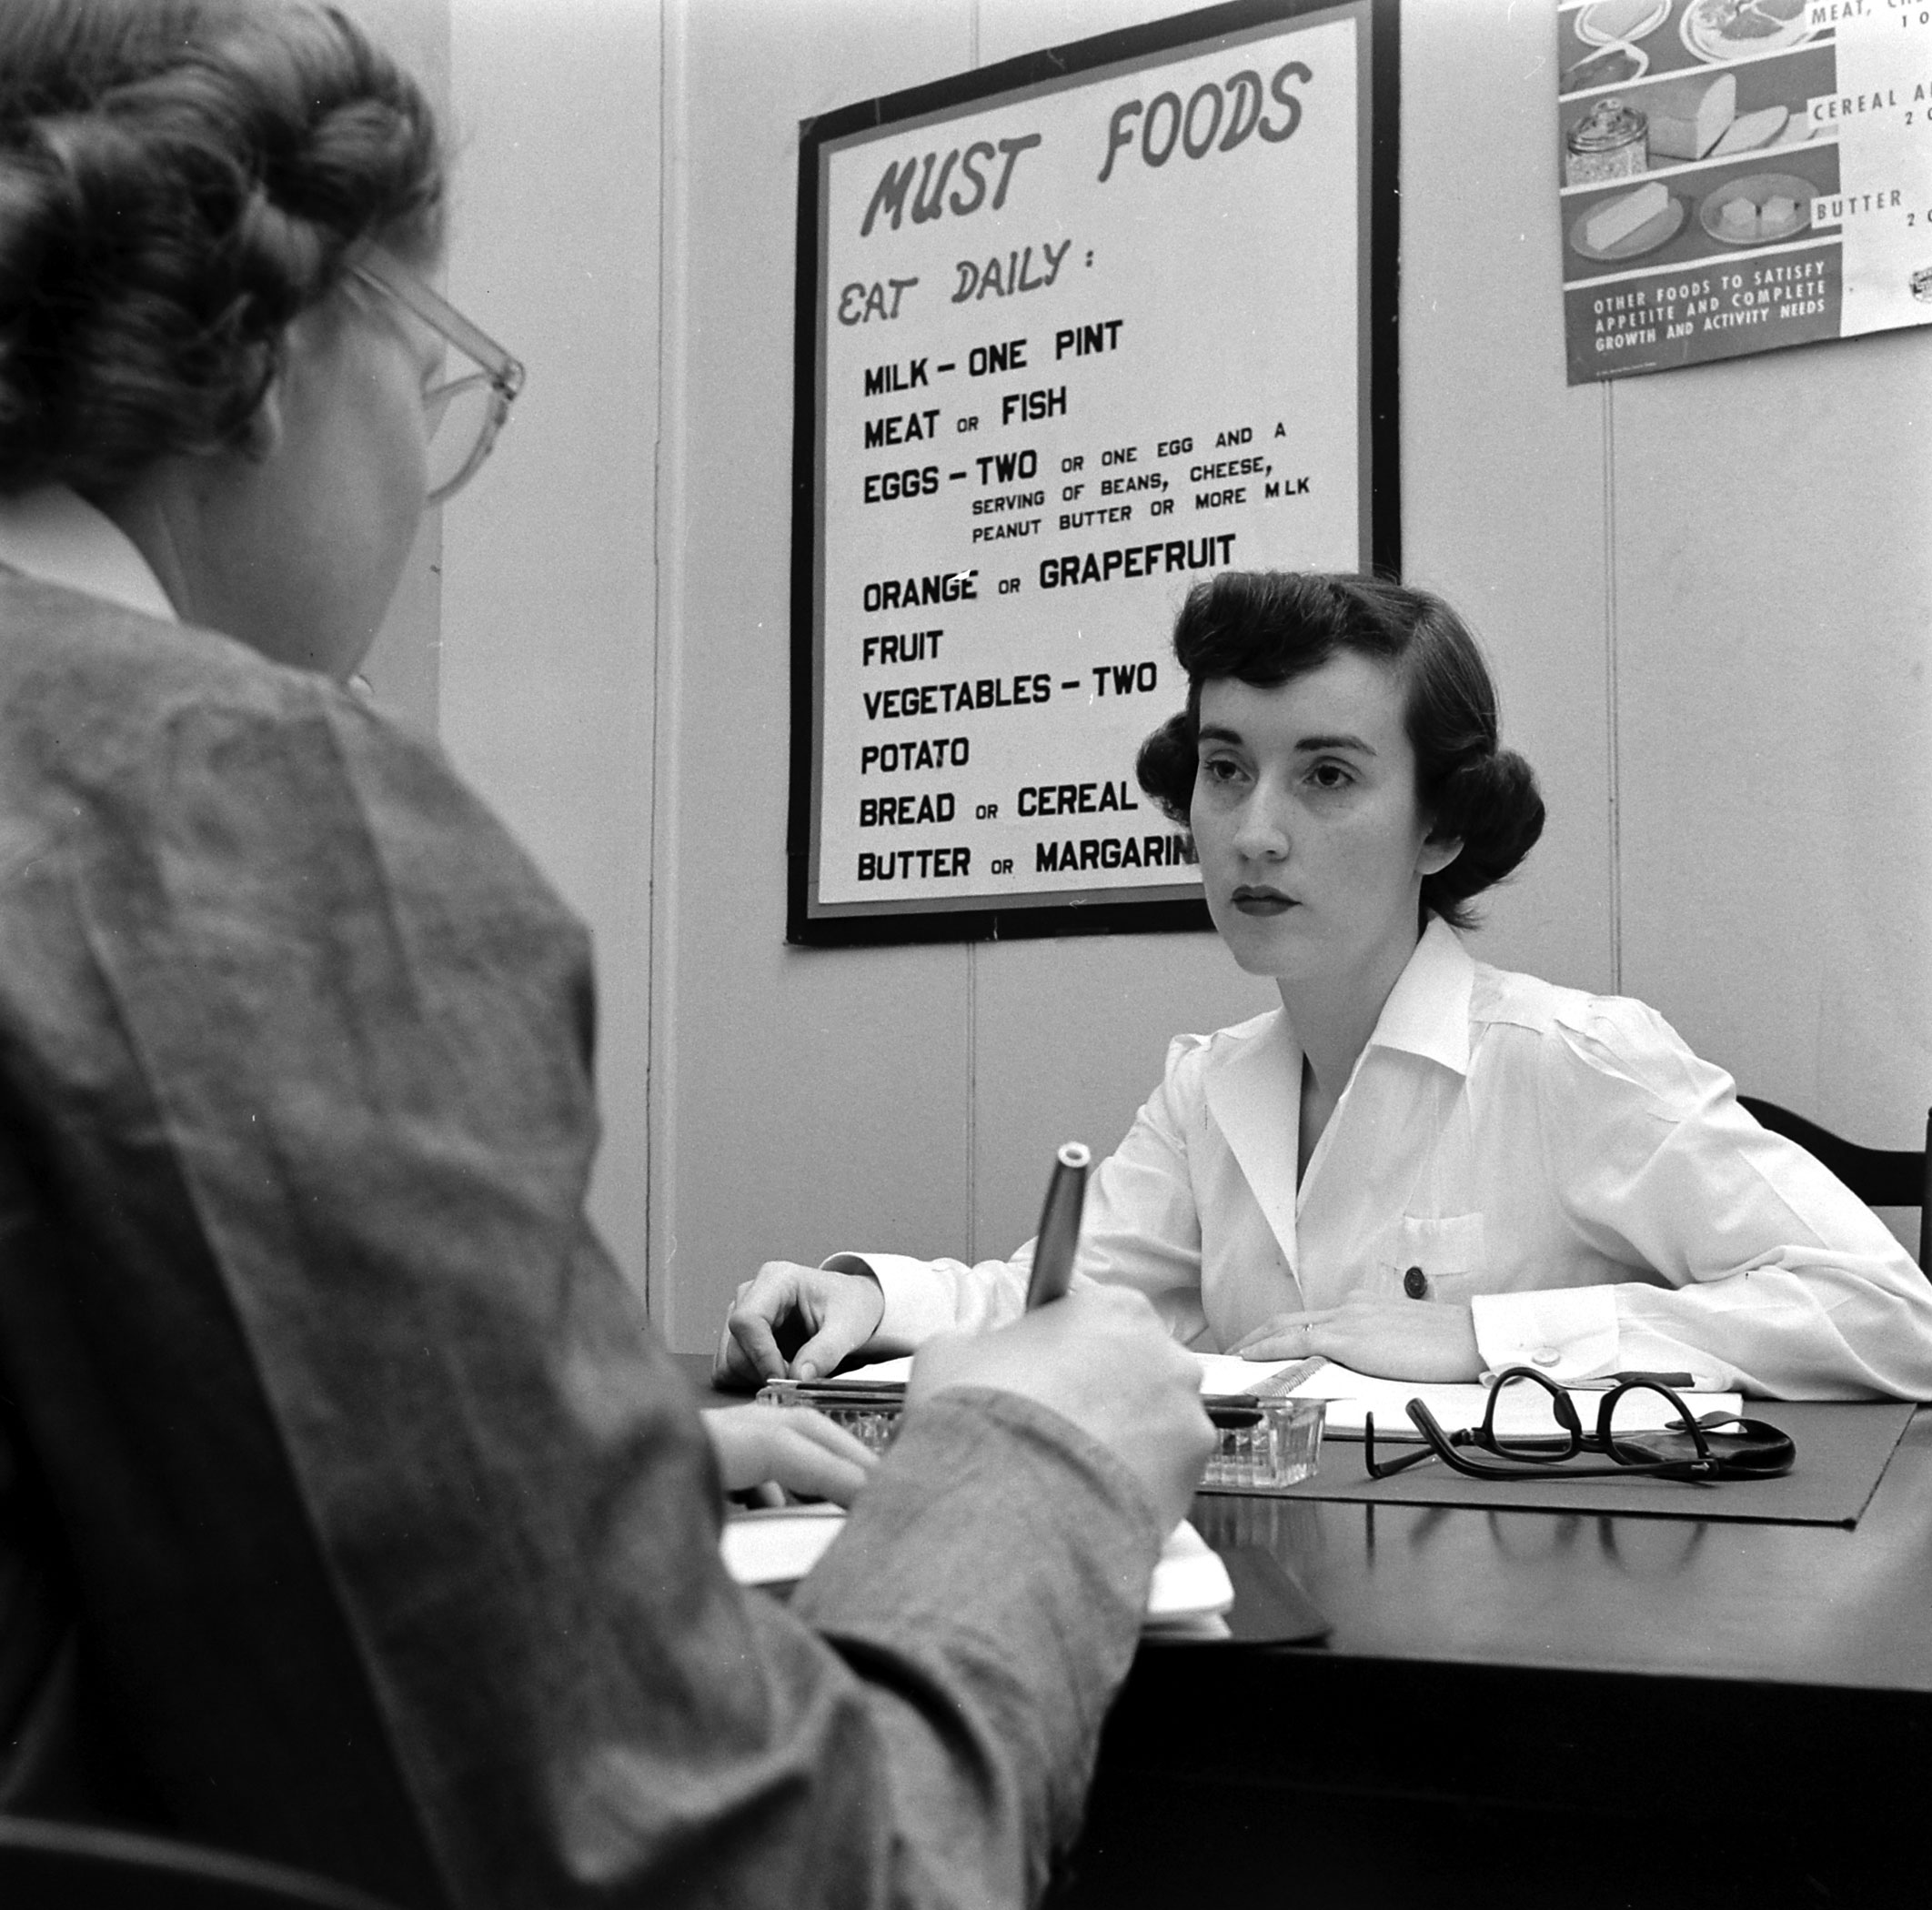 Dorothy Bradley (left), photographed for LIFE magazine article on obesity, meets with a nutritionist, 1949.